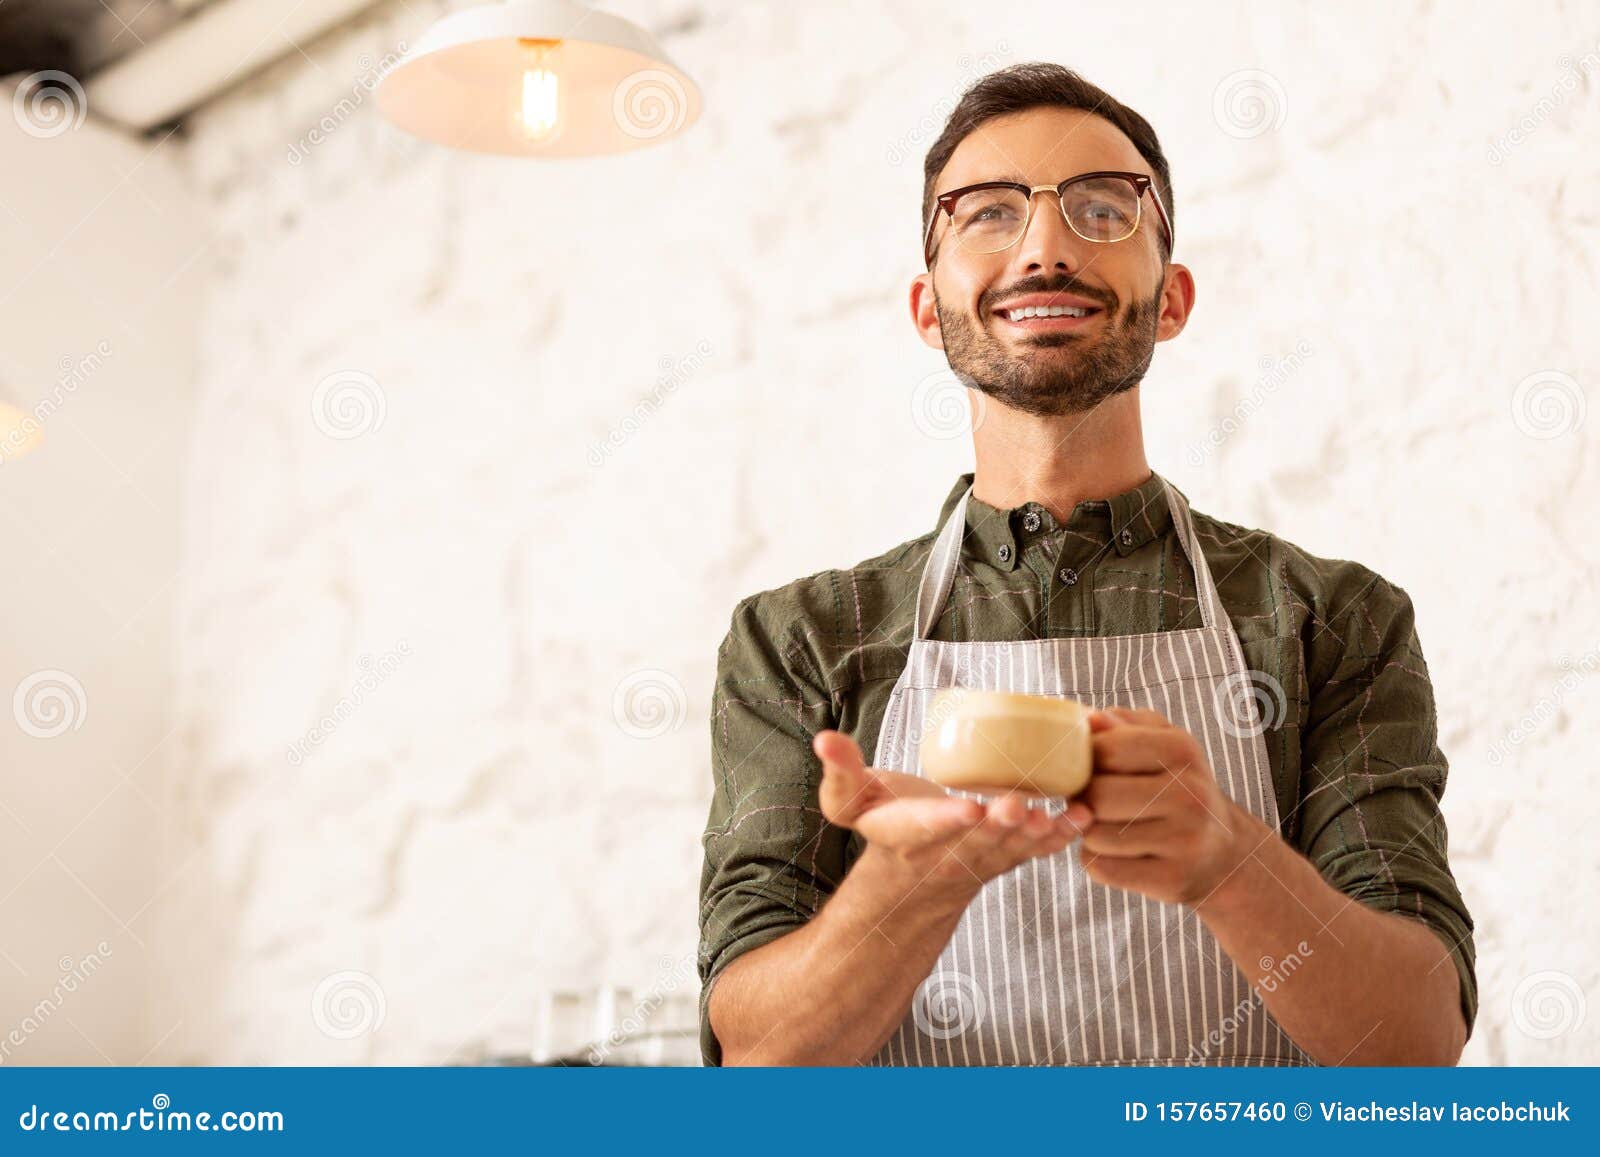 Businessman Owning Cafe Holding Cup of Coffee with Milk Stock Photo ...